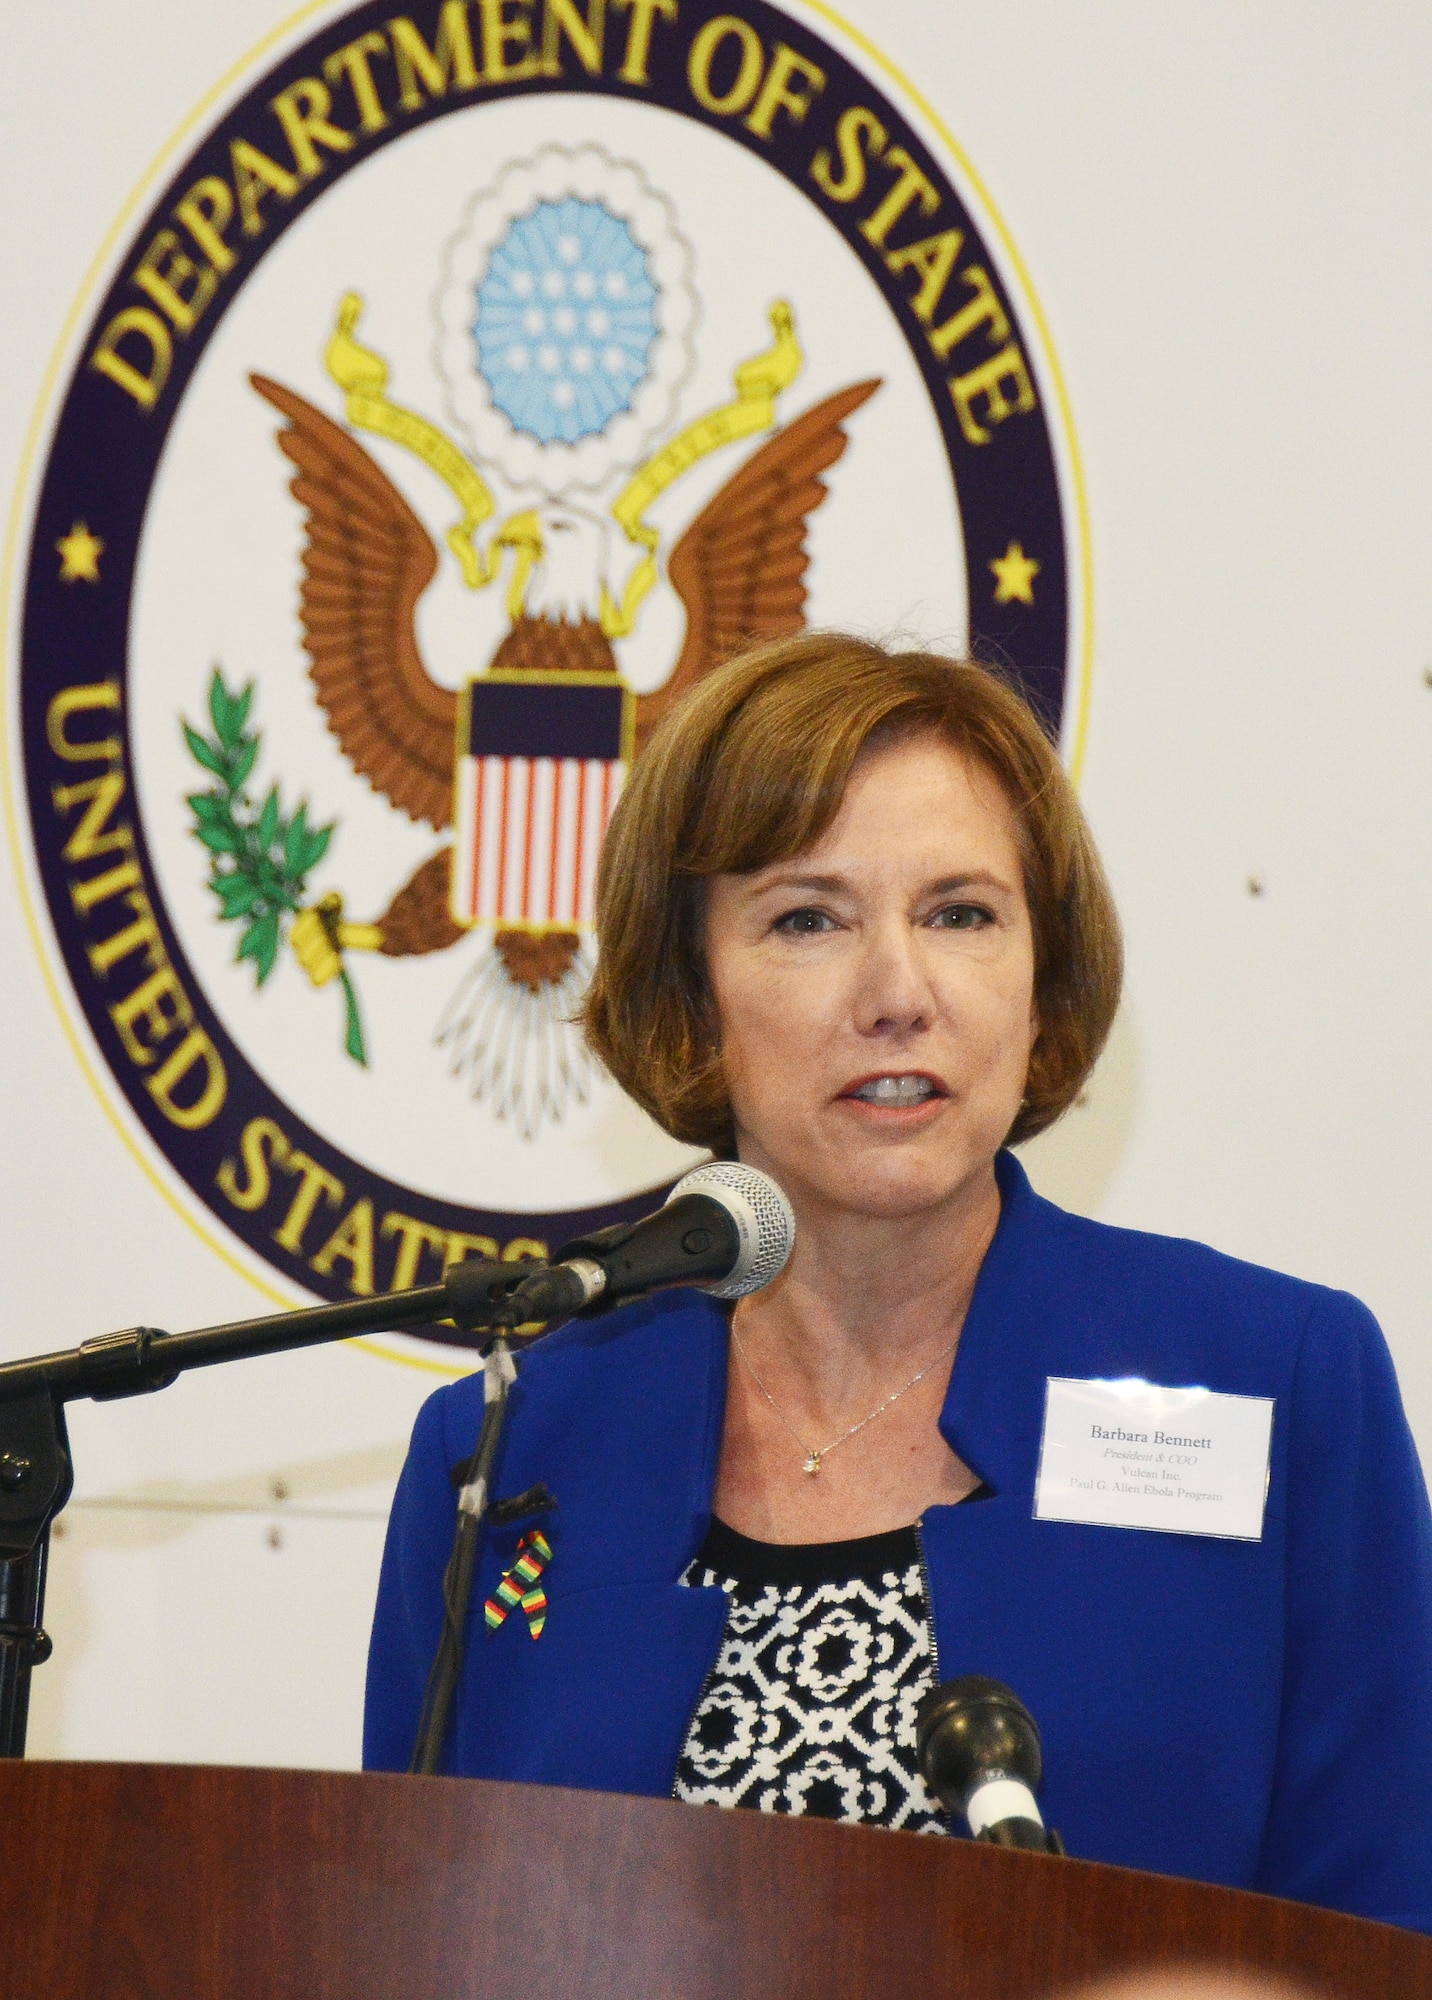 Barbara Bennett, President and COO of Vulcan, Inc. and Paul G. Allen Ebola Program representative, addresses an audience of personnel from the Department of State, MRI Global, Paul Allen Foundation and members of the 94th Airlift Wing at an unveiling of the DOS Containerized Biocontainment System held at Dobbins Air Reserve Base, Ga. Aug. 11, 2015. (U.S. Air Force photo/Don Peek)